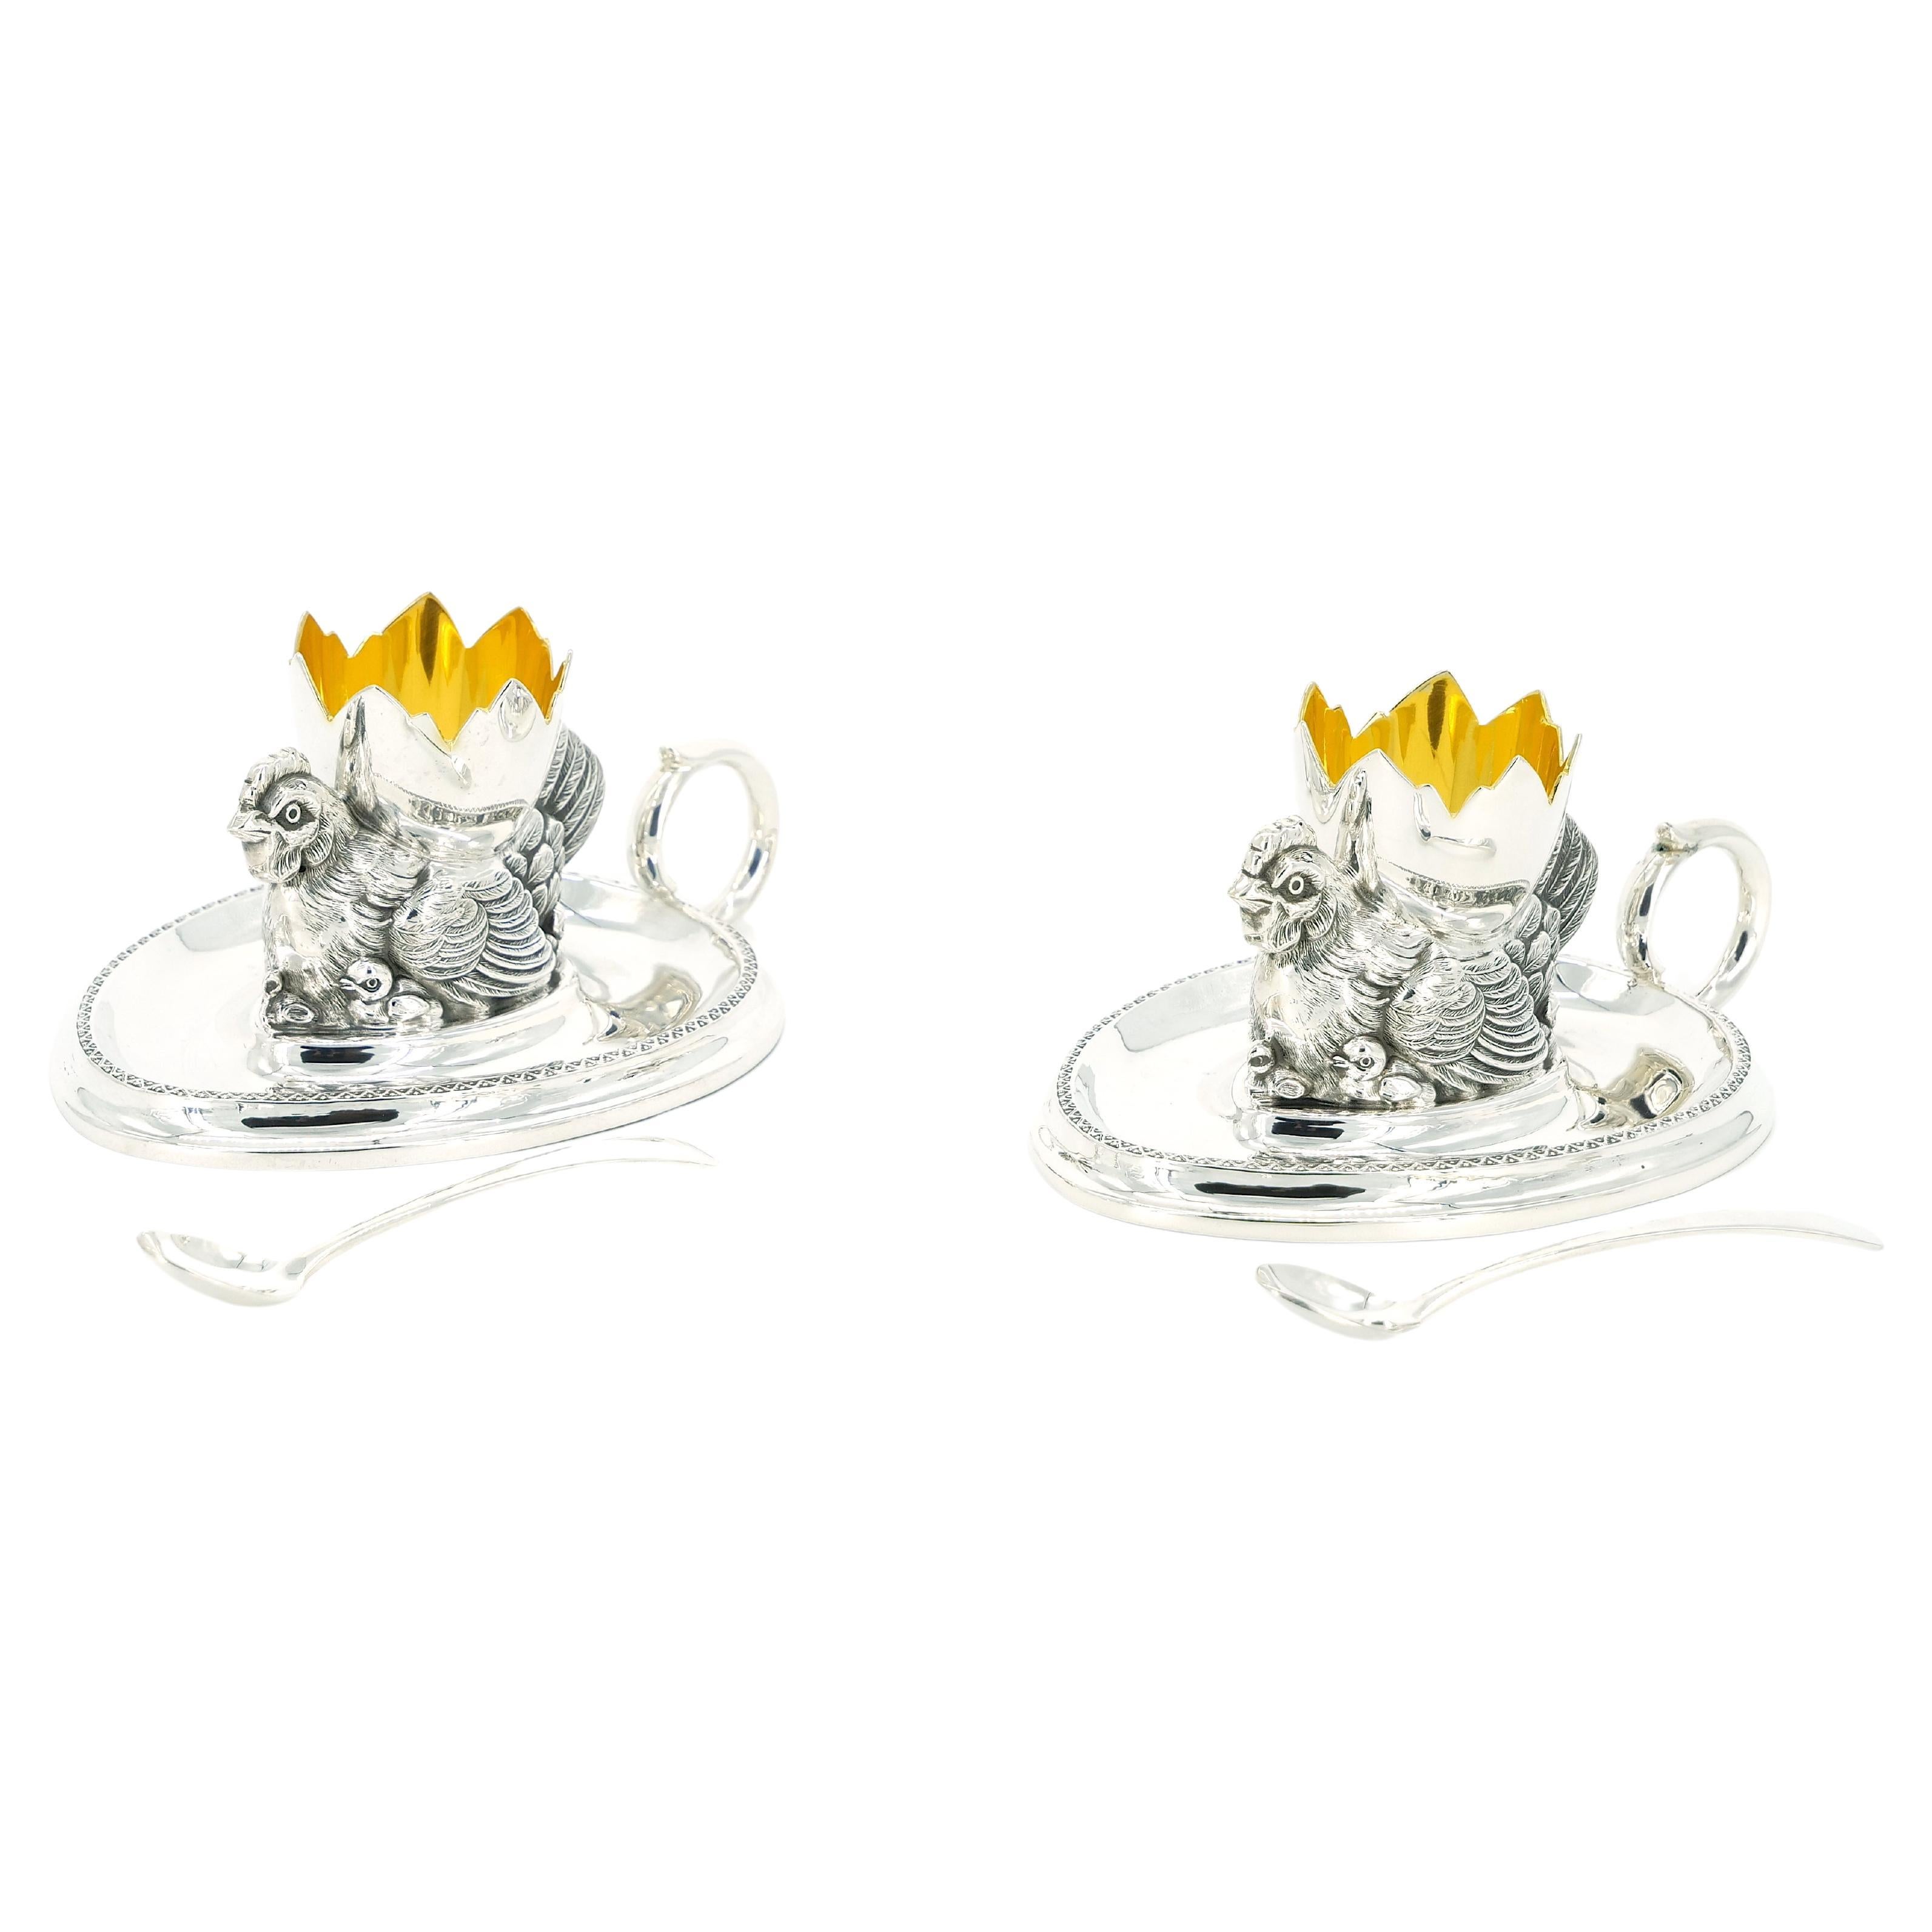 Italian Pair Silver Plate Tableware Chicken Figurine With soft Boiled Egg Holder / Spoon For Sale